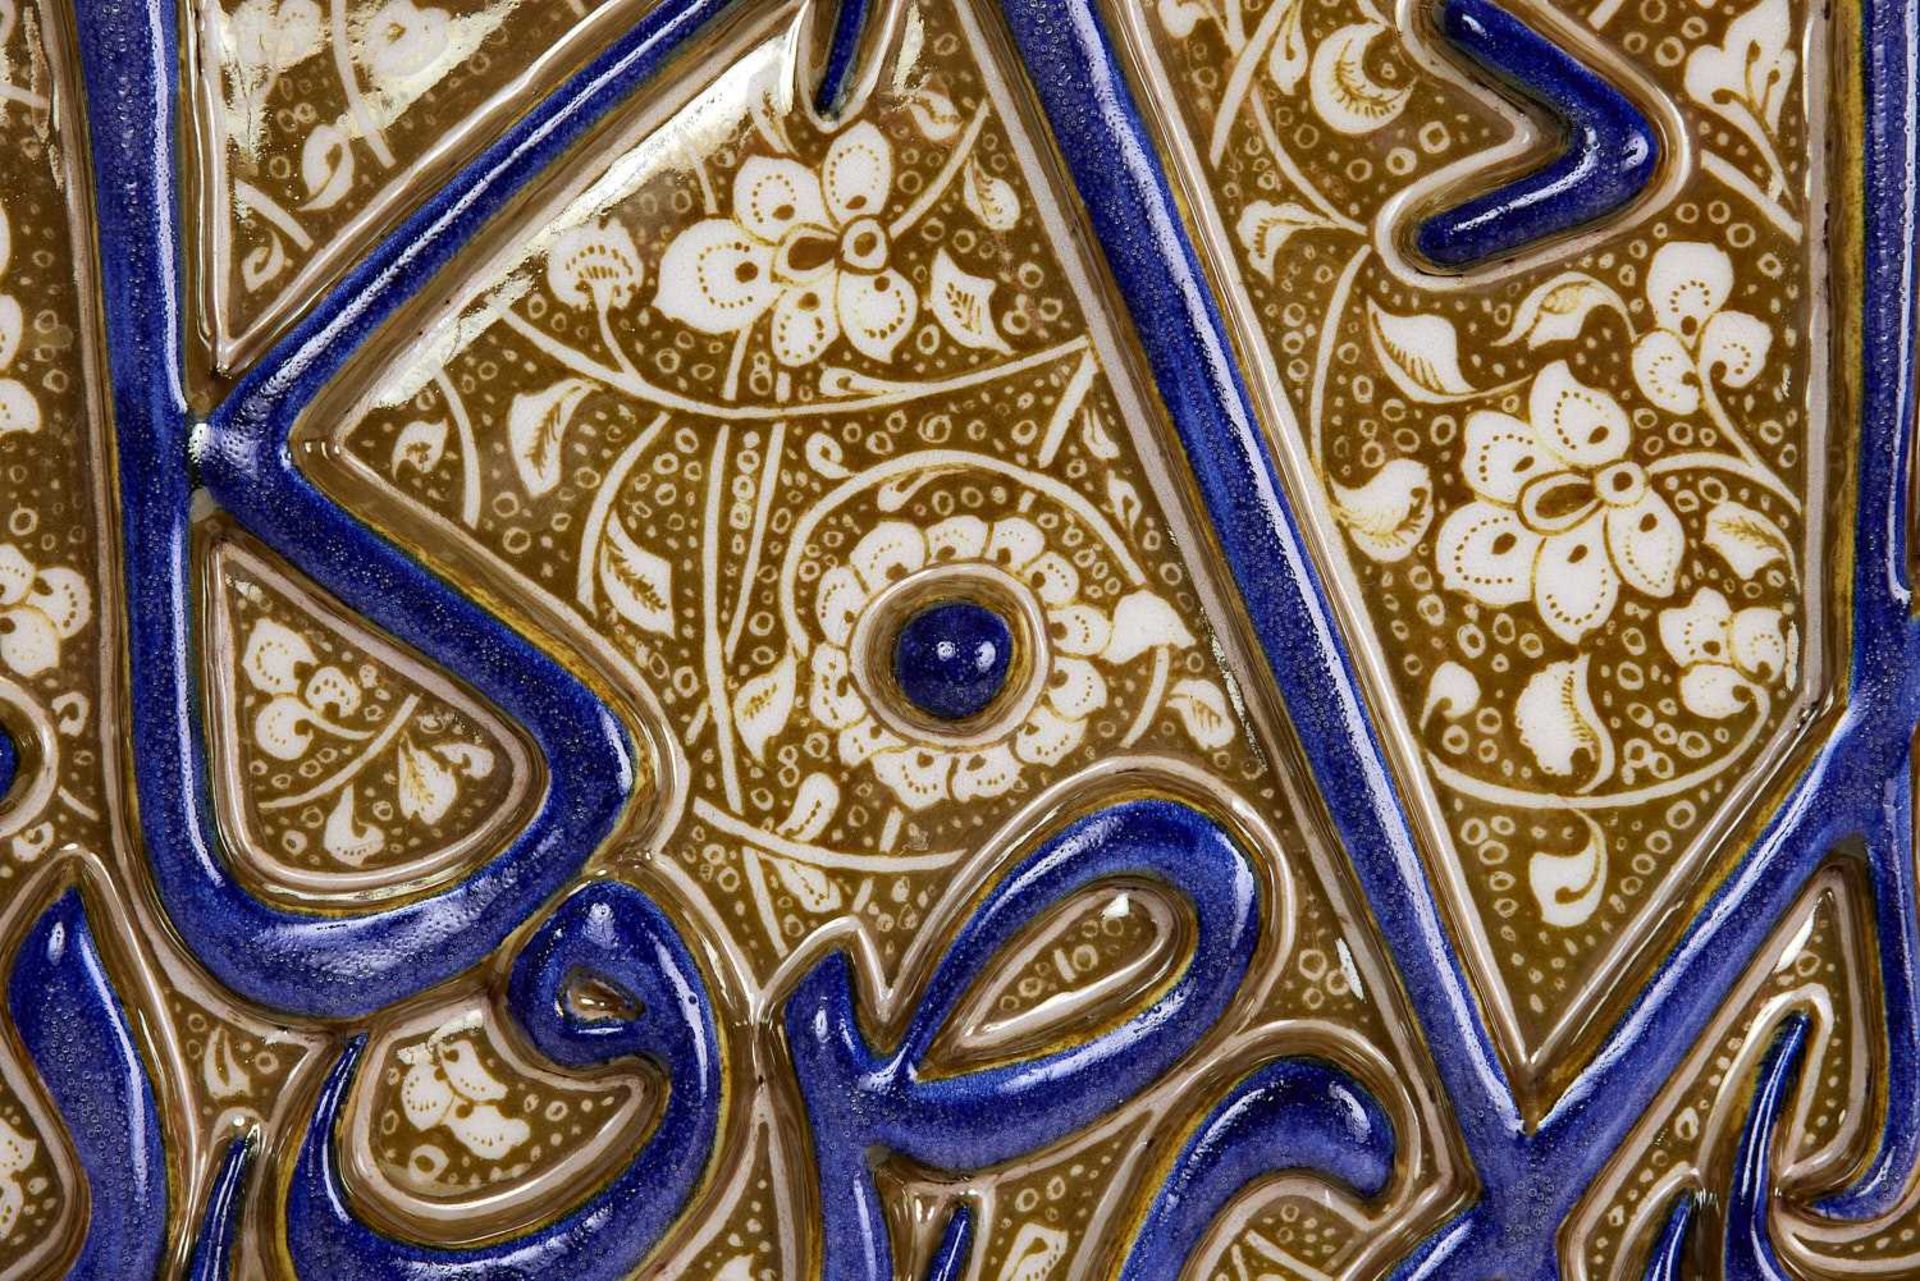 A 13TH / 14TH CENTURY STYLE KASHAN MOULDED LUSTRE POTTERY TILE - Image 3 of 3